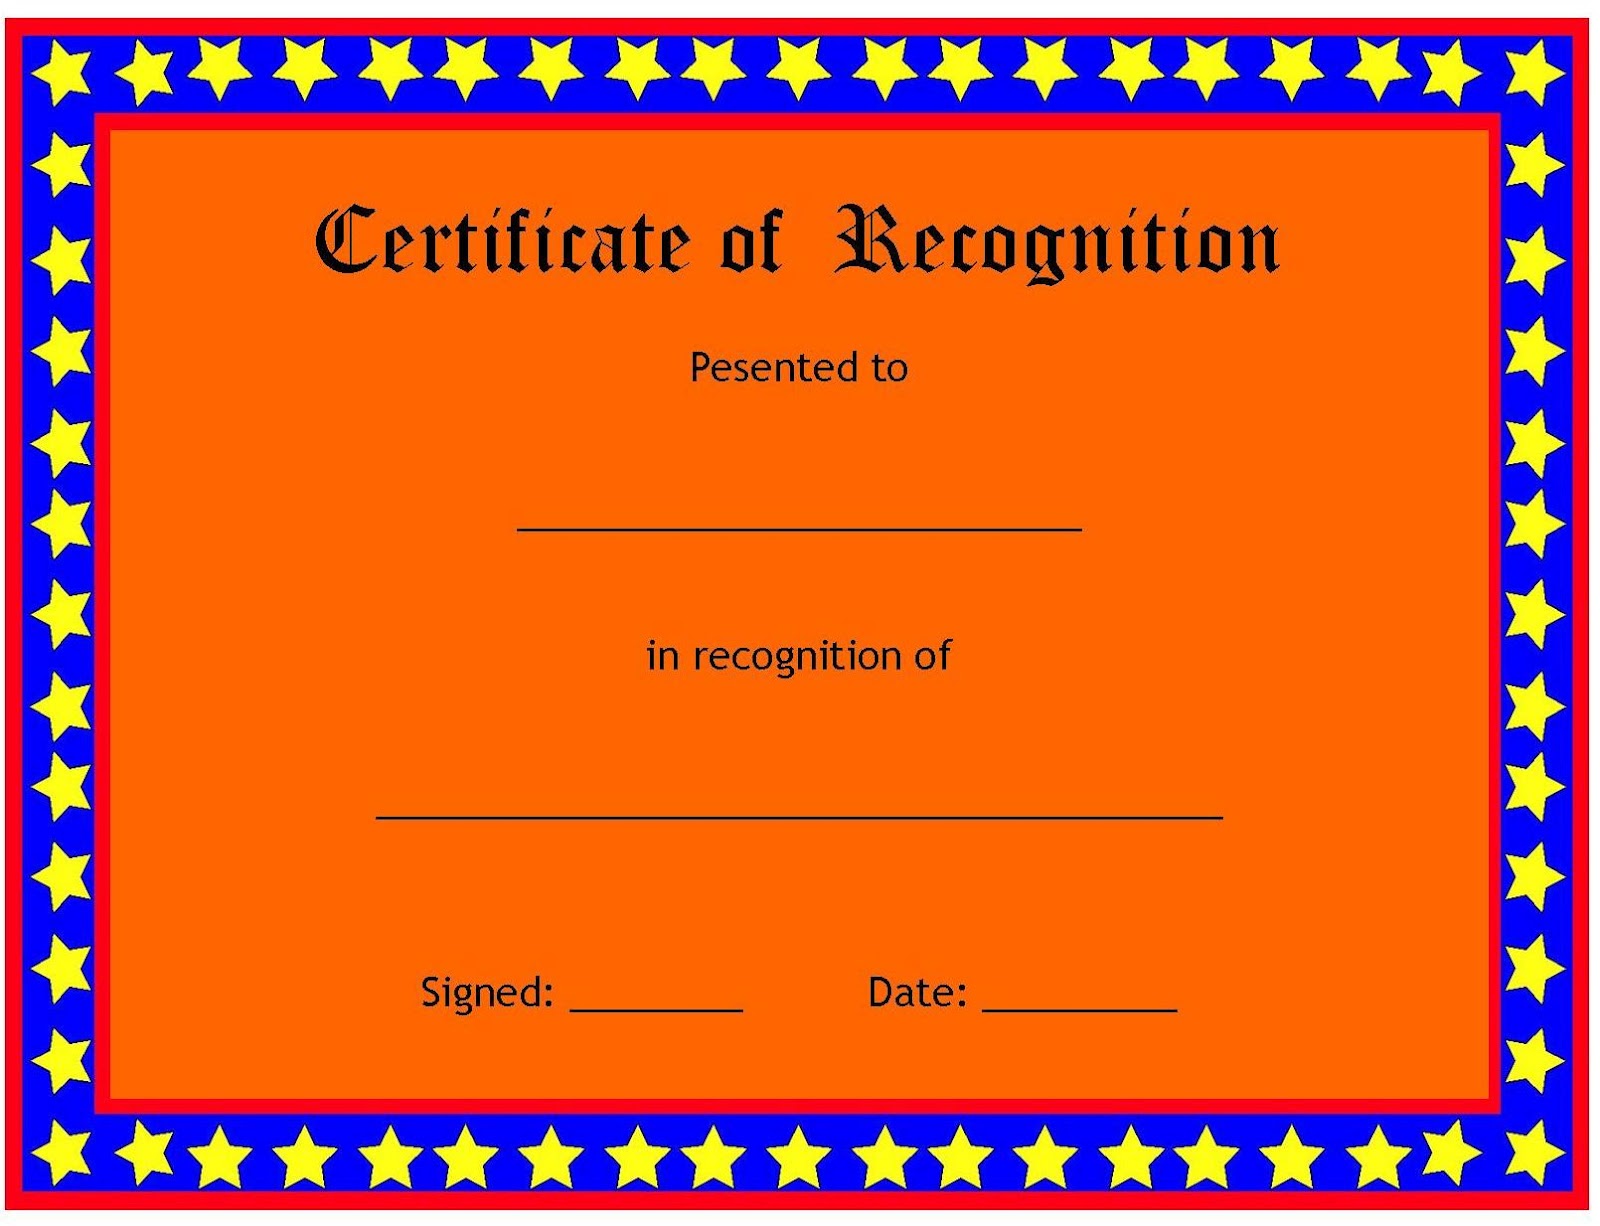 A Collection of Free Certificate Borders and Templates